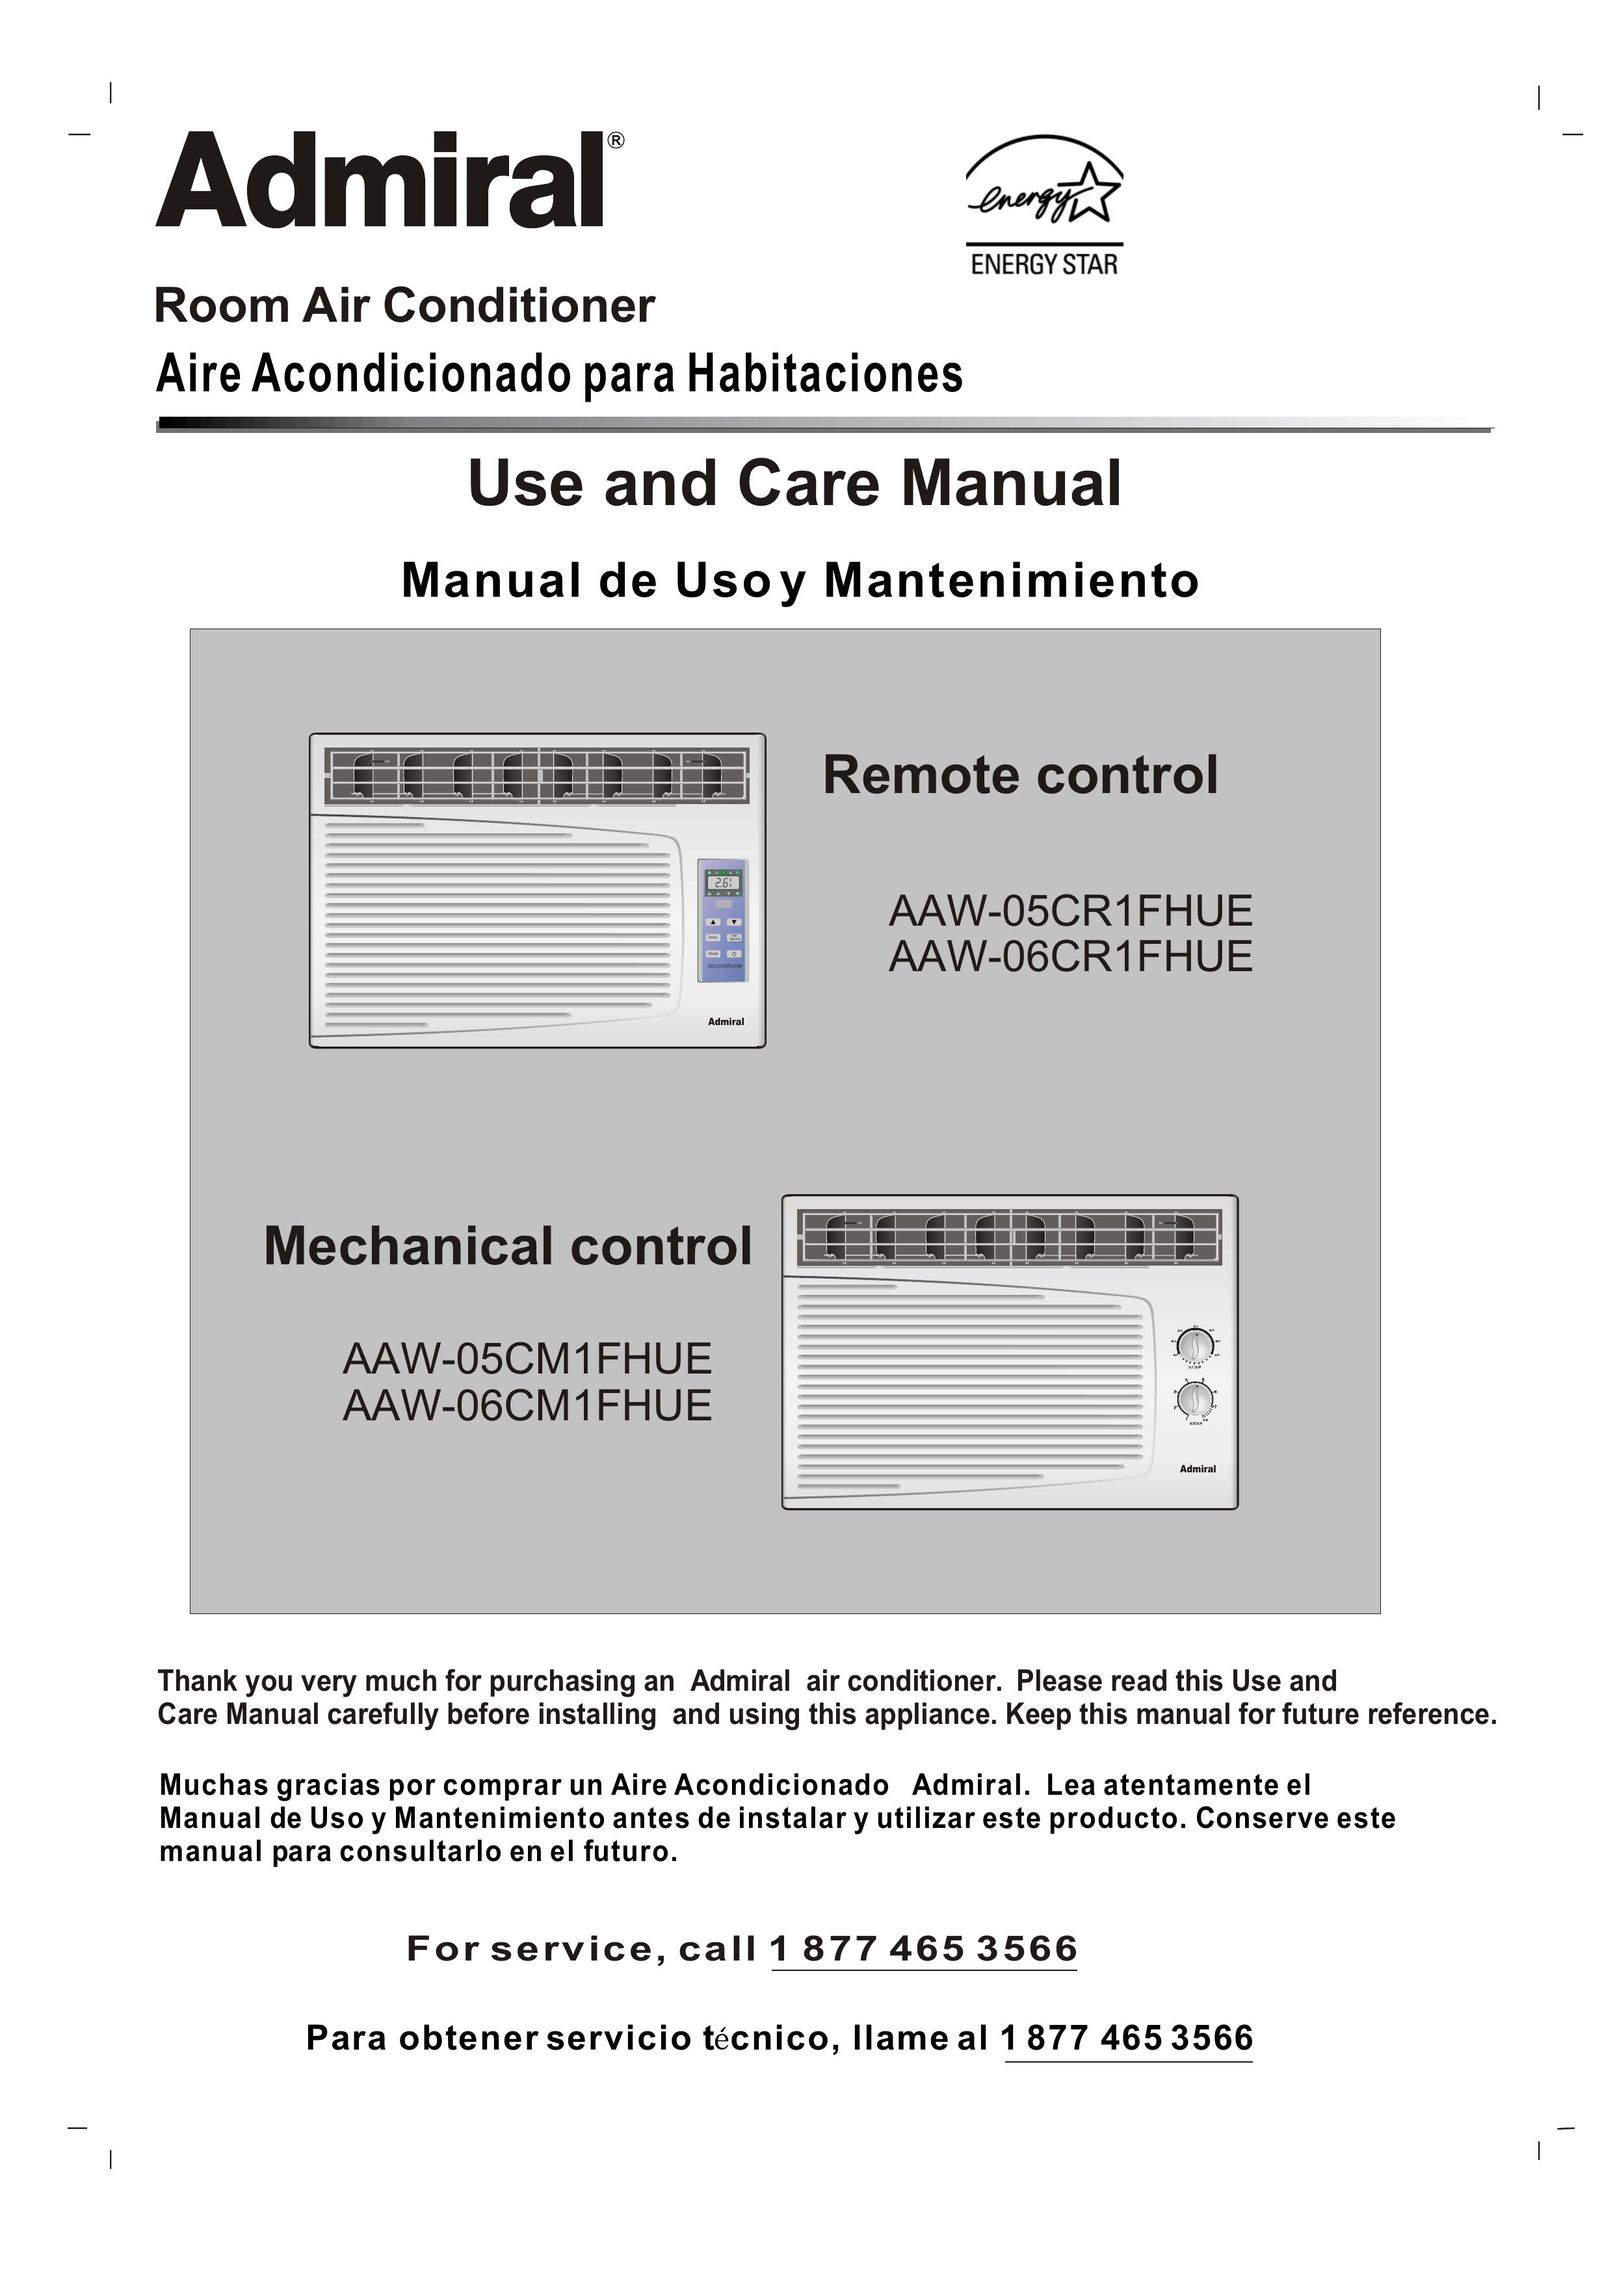 Admiral AAW-05CM1FHUE Air Conditioner User Manual (Page 1)